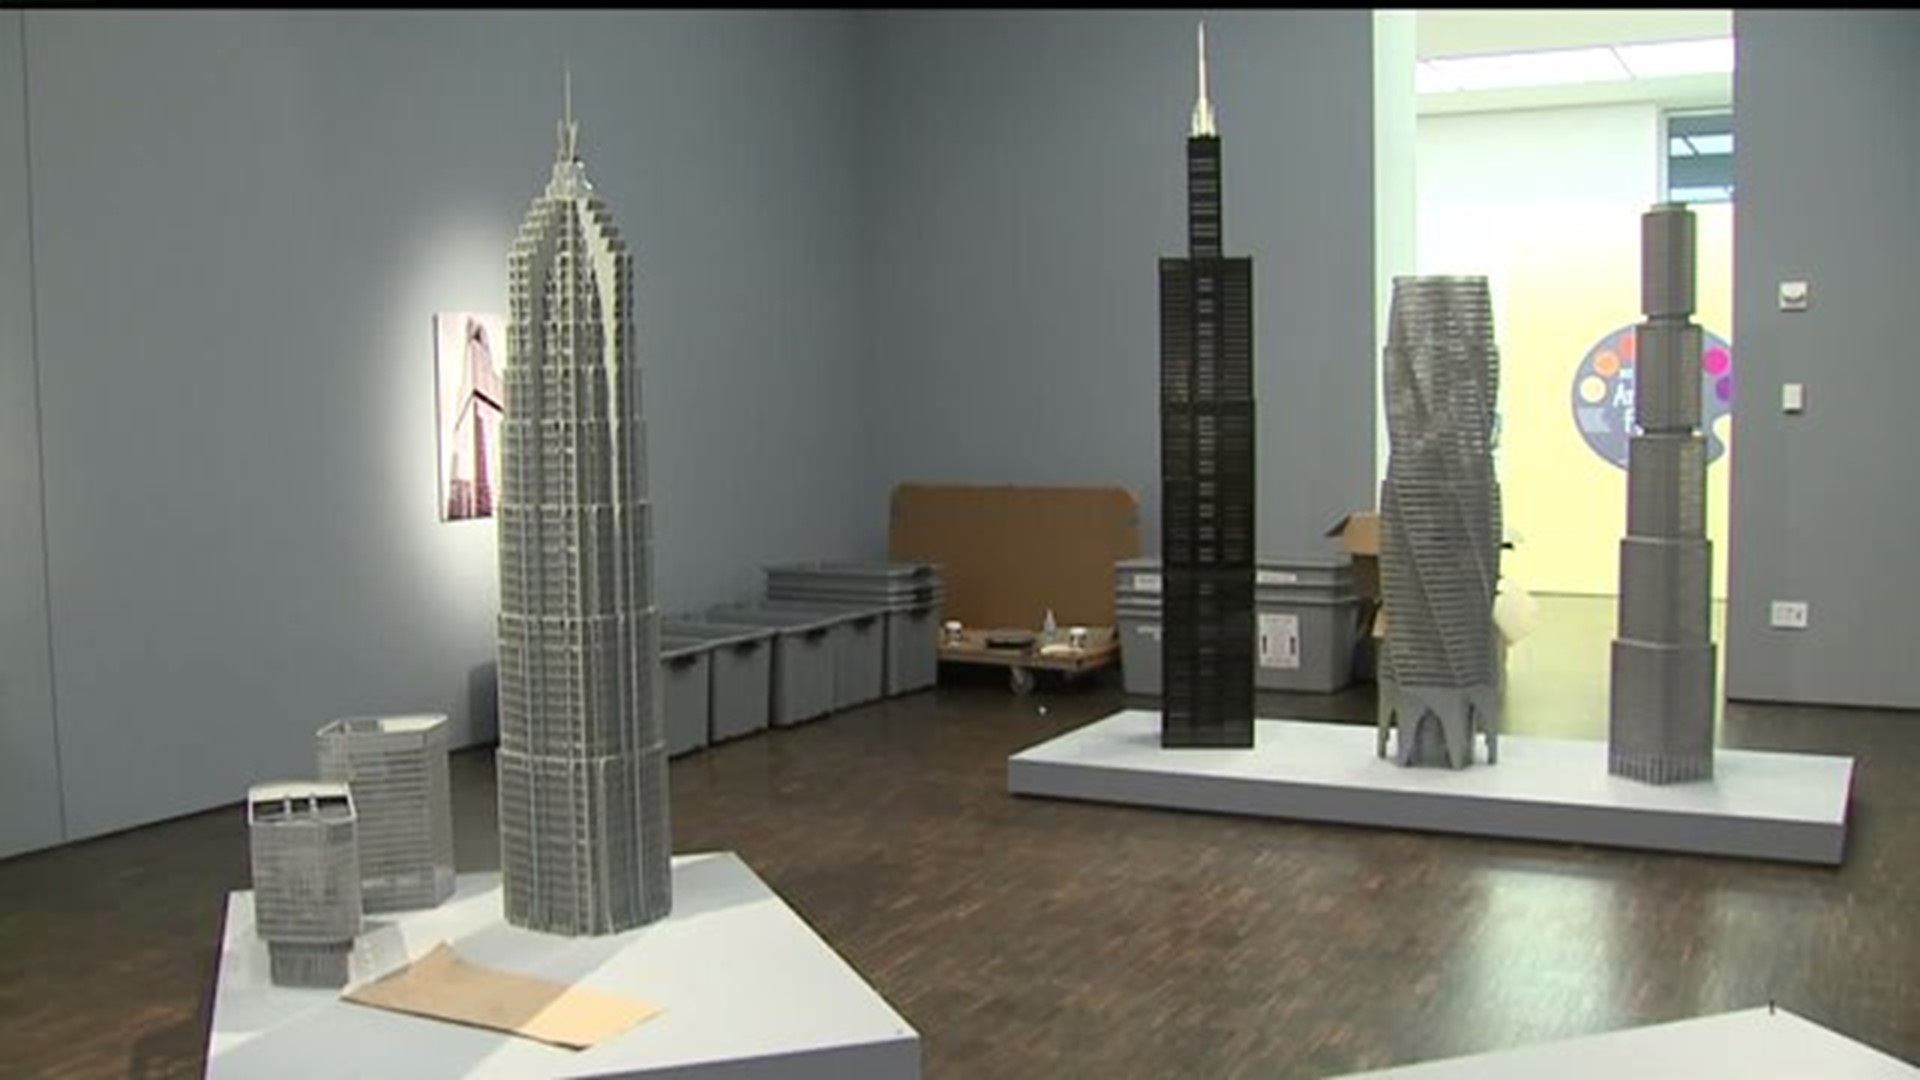 Lego buildings display at the Figge